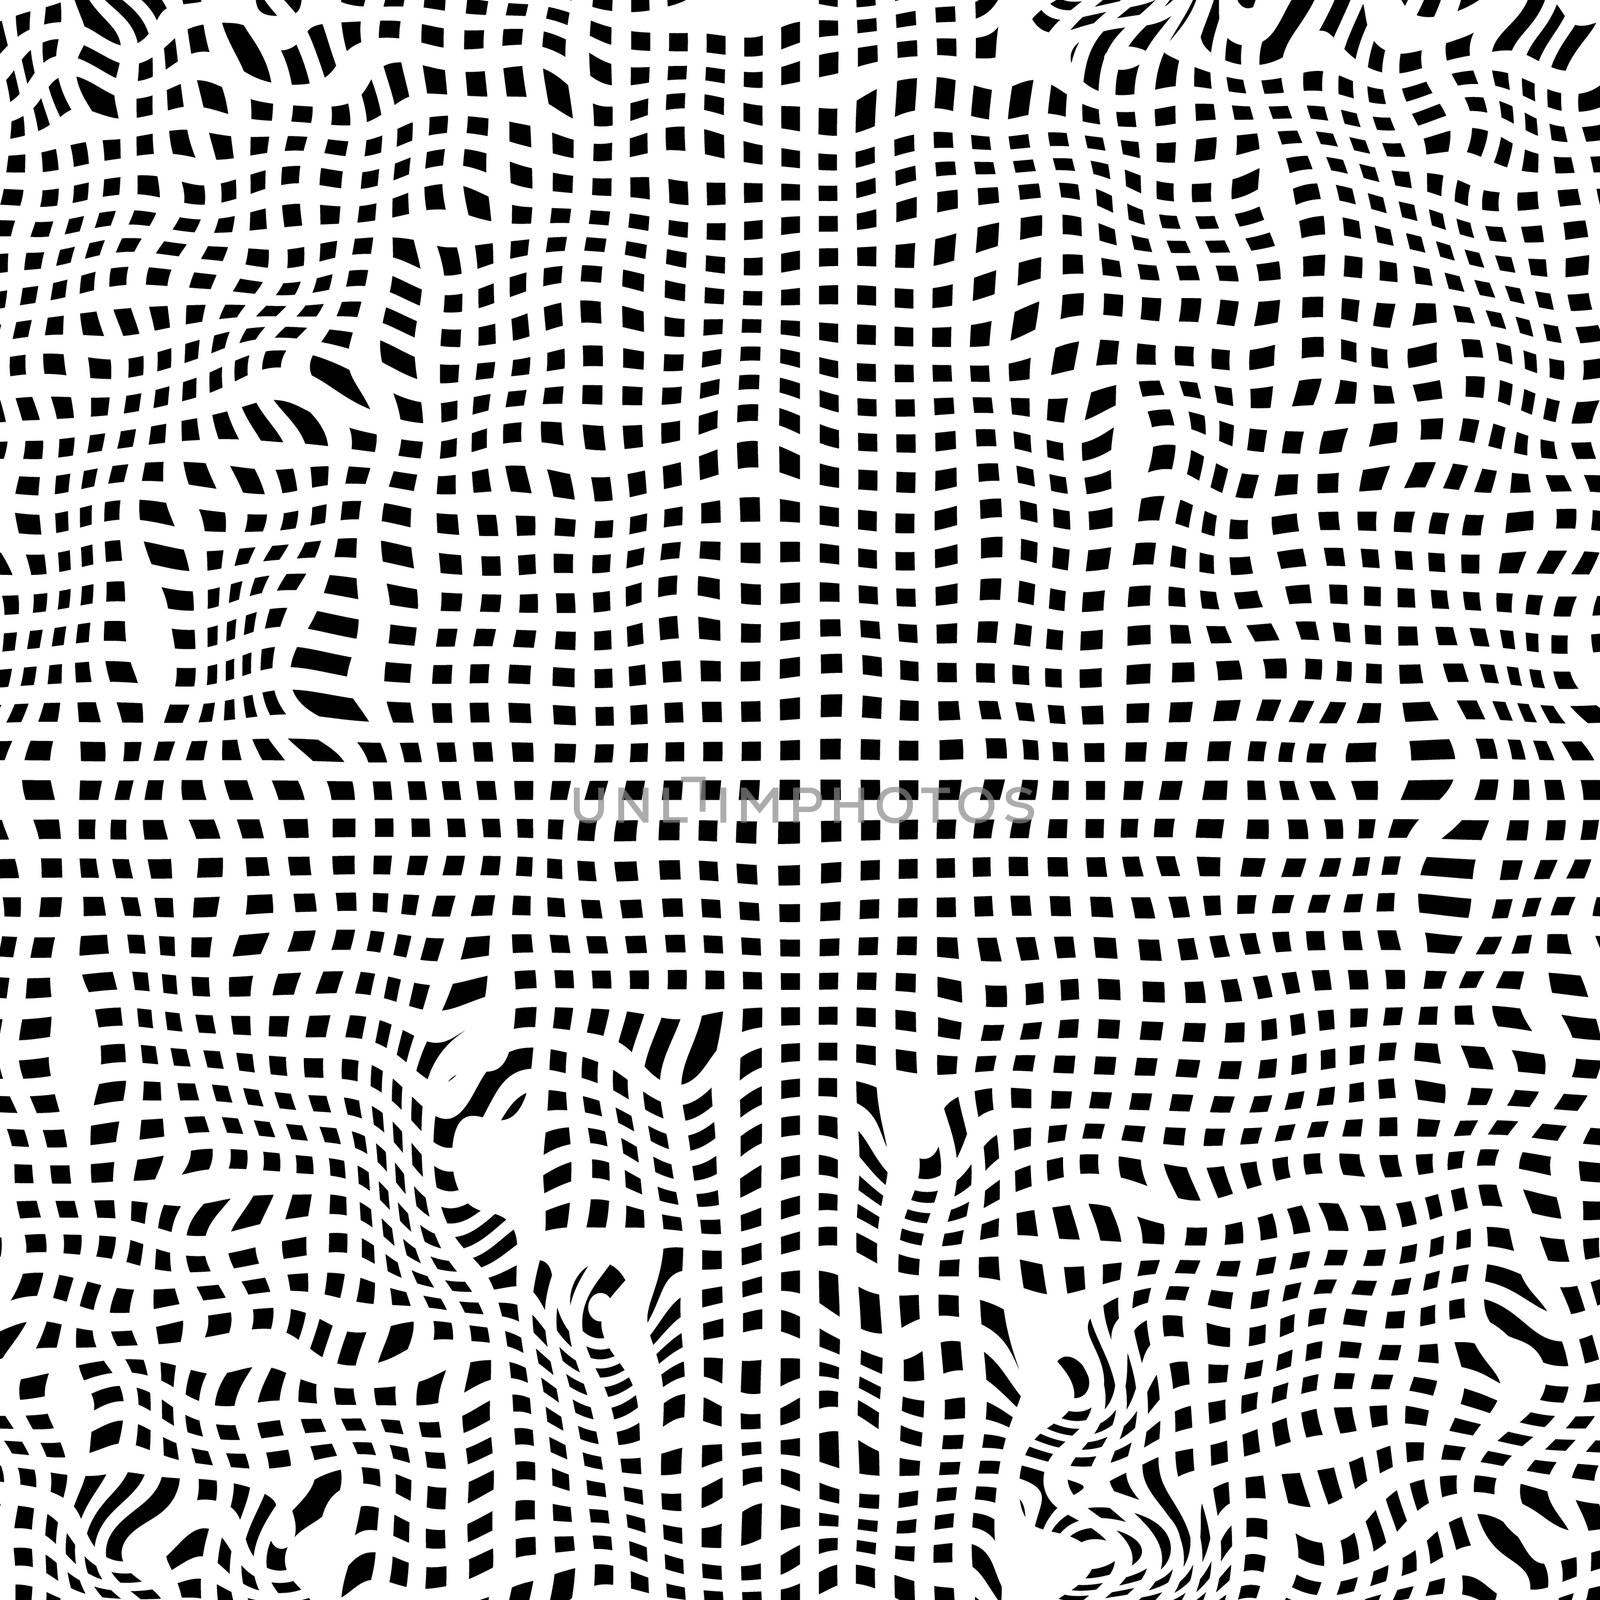 abstract black and white net pattern by weknow